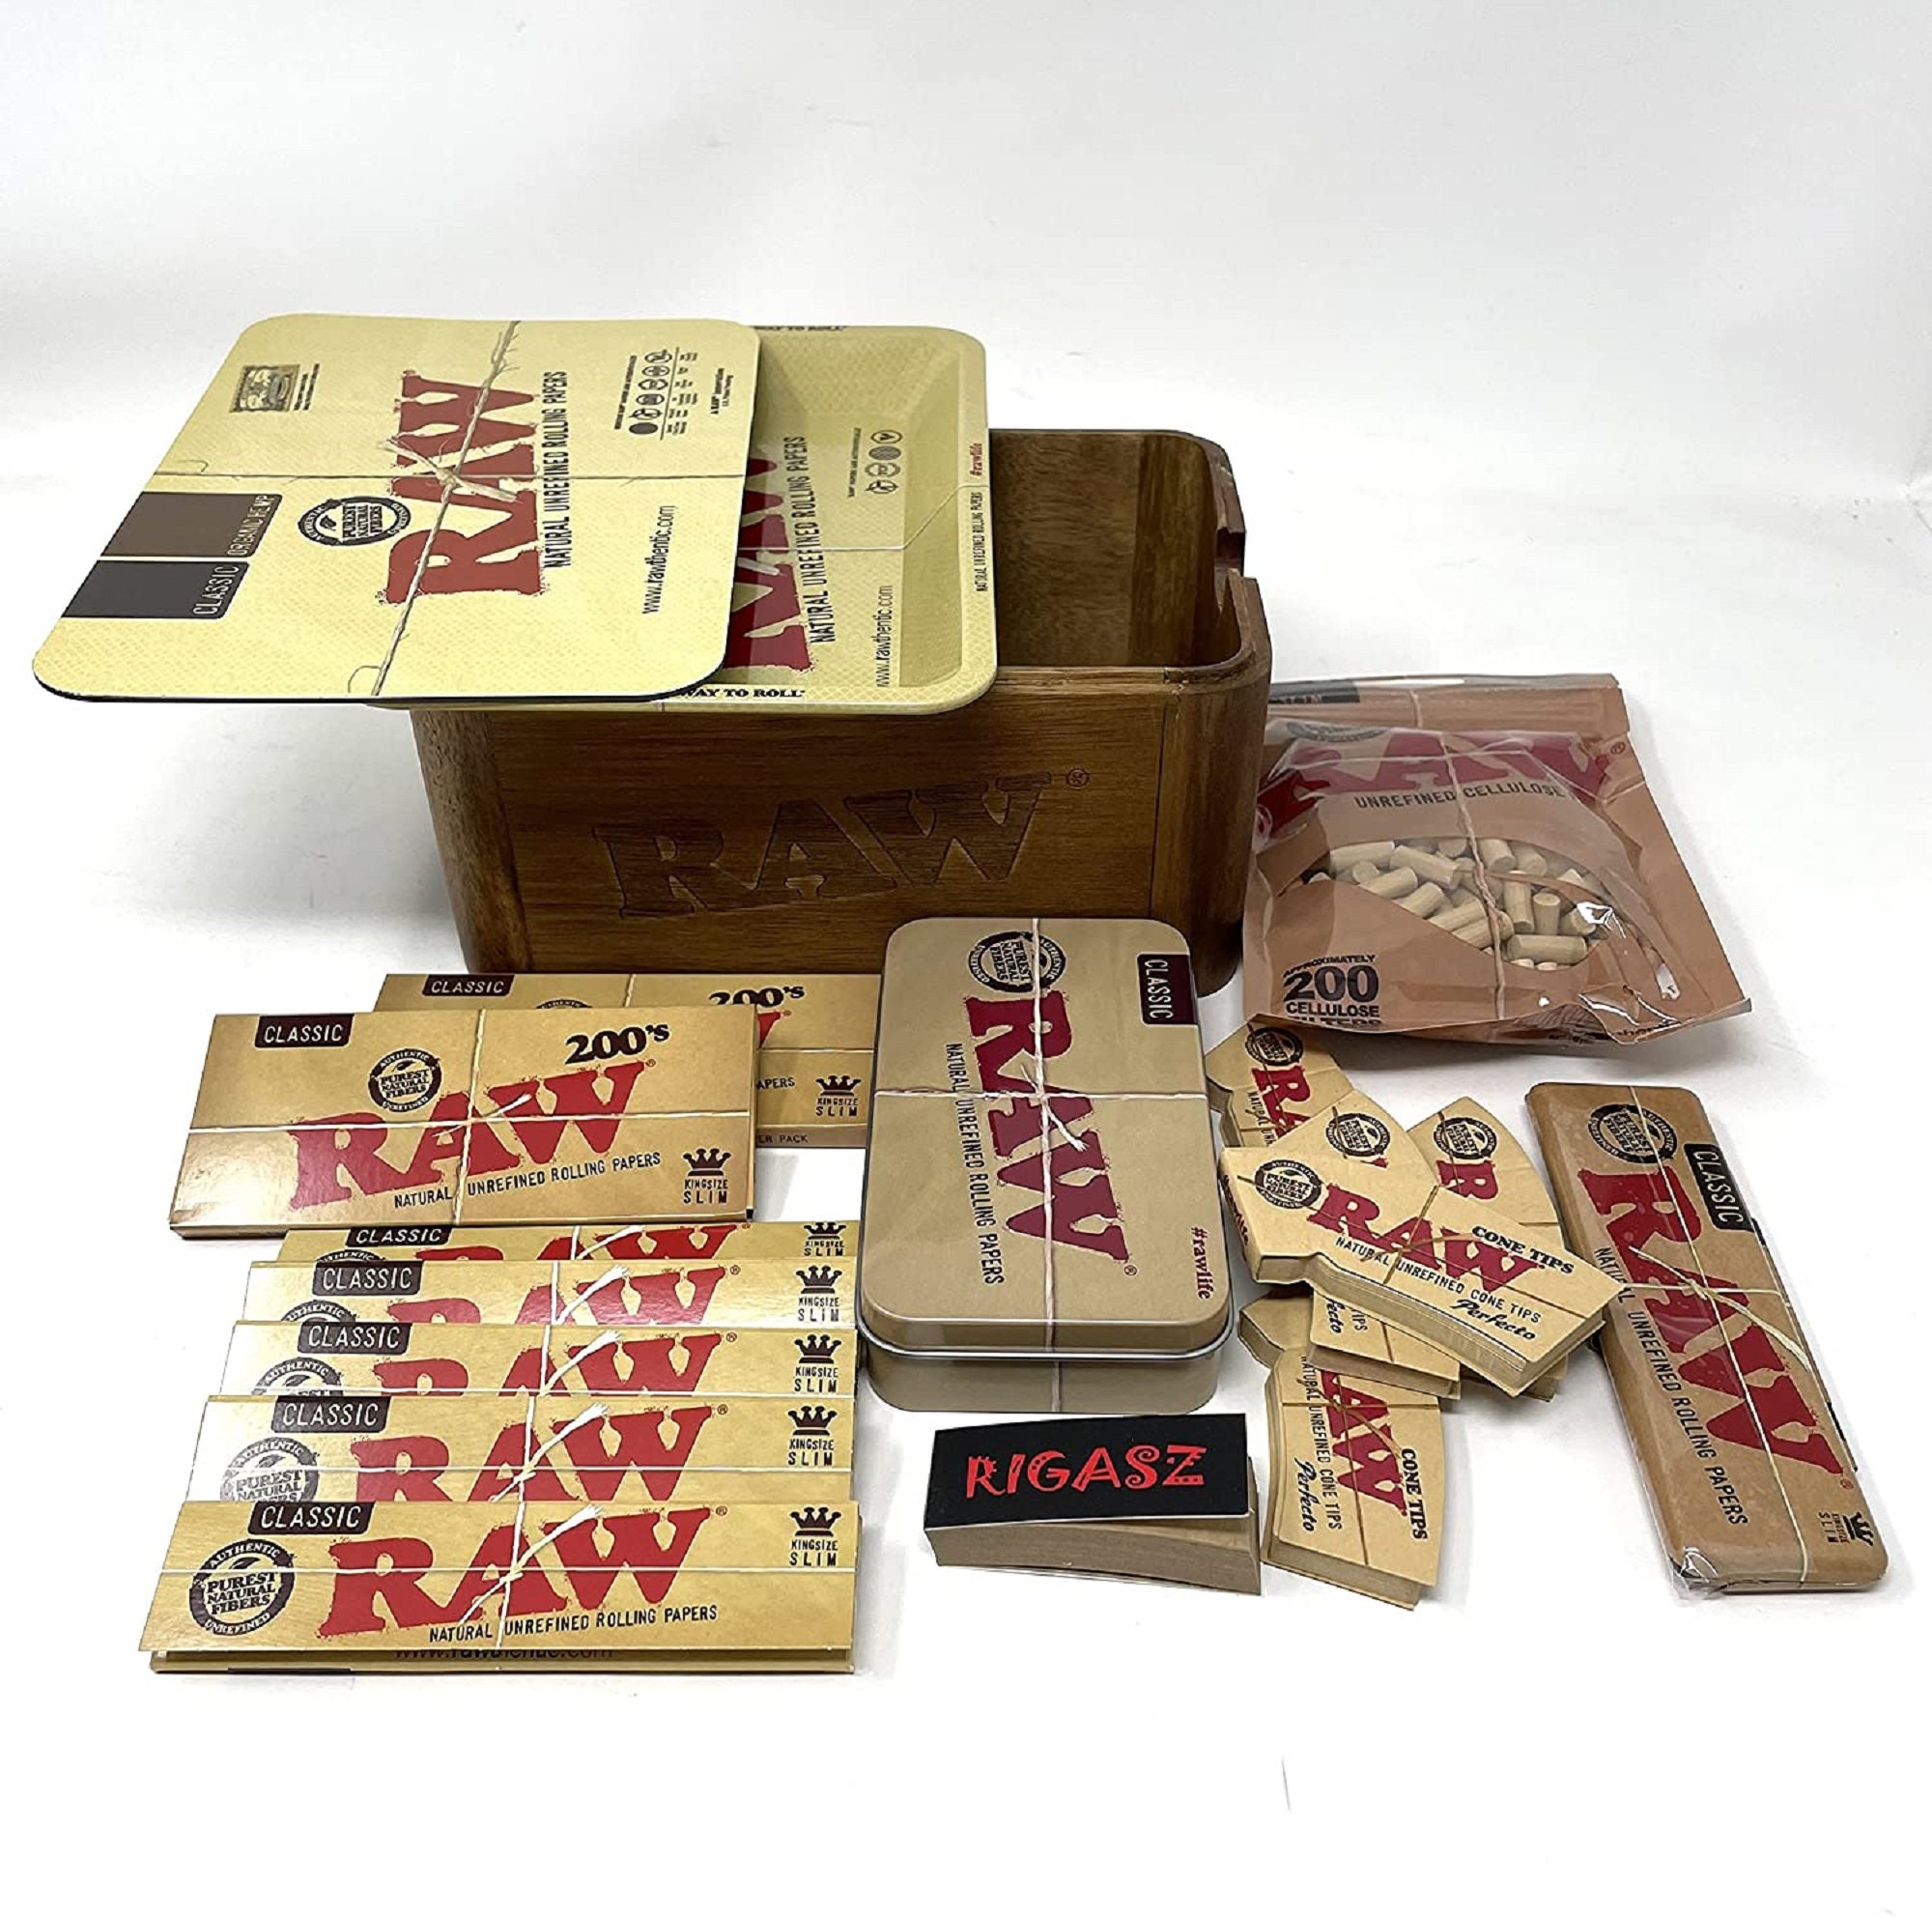 HB Raw Authentic Cache Mini Box - Wooden Stash Box with Tray (1 Count)